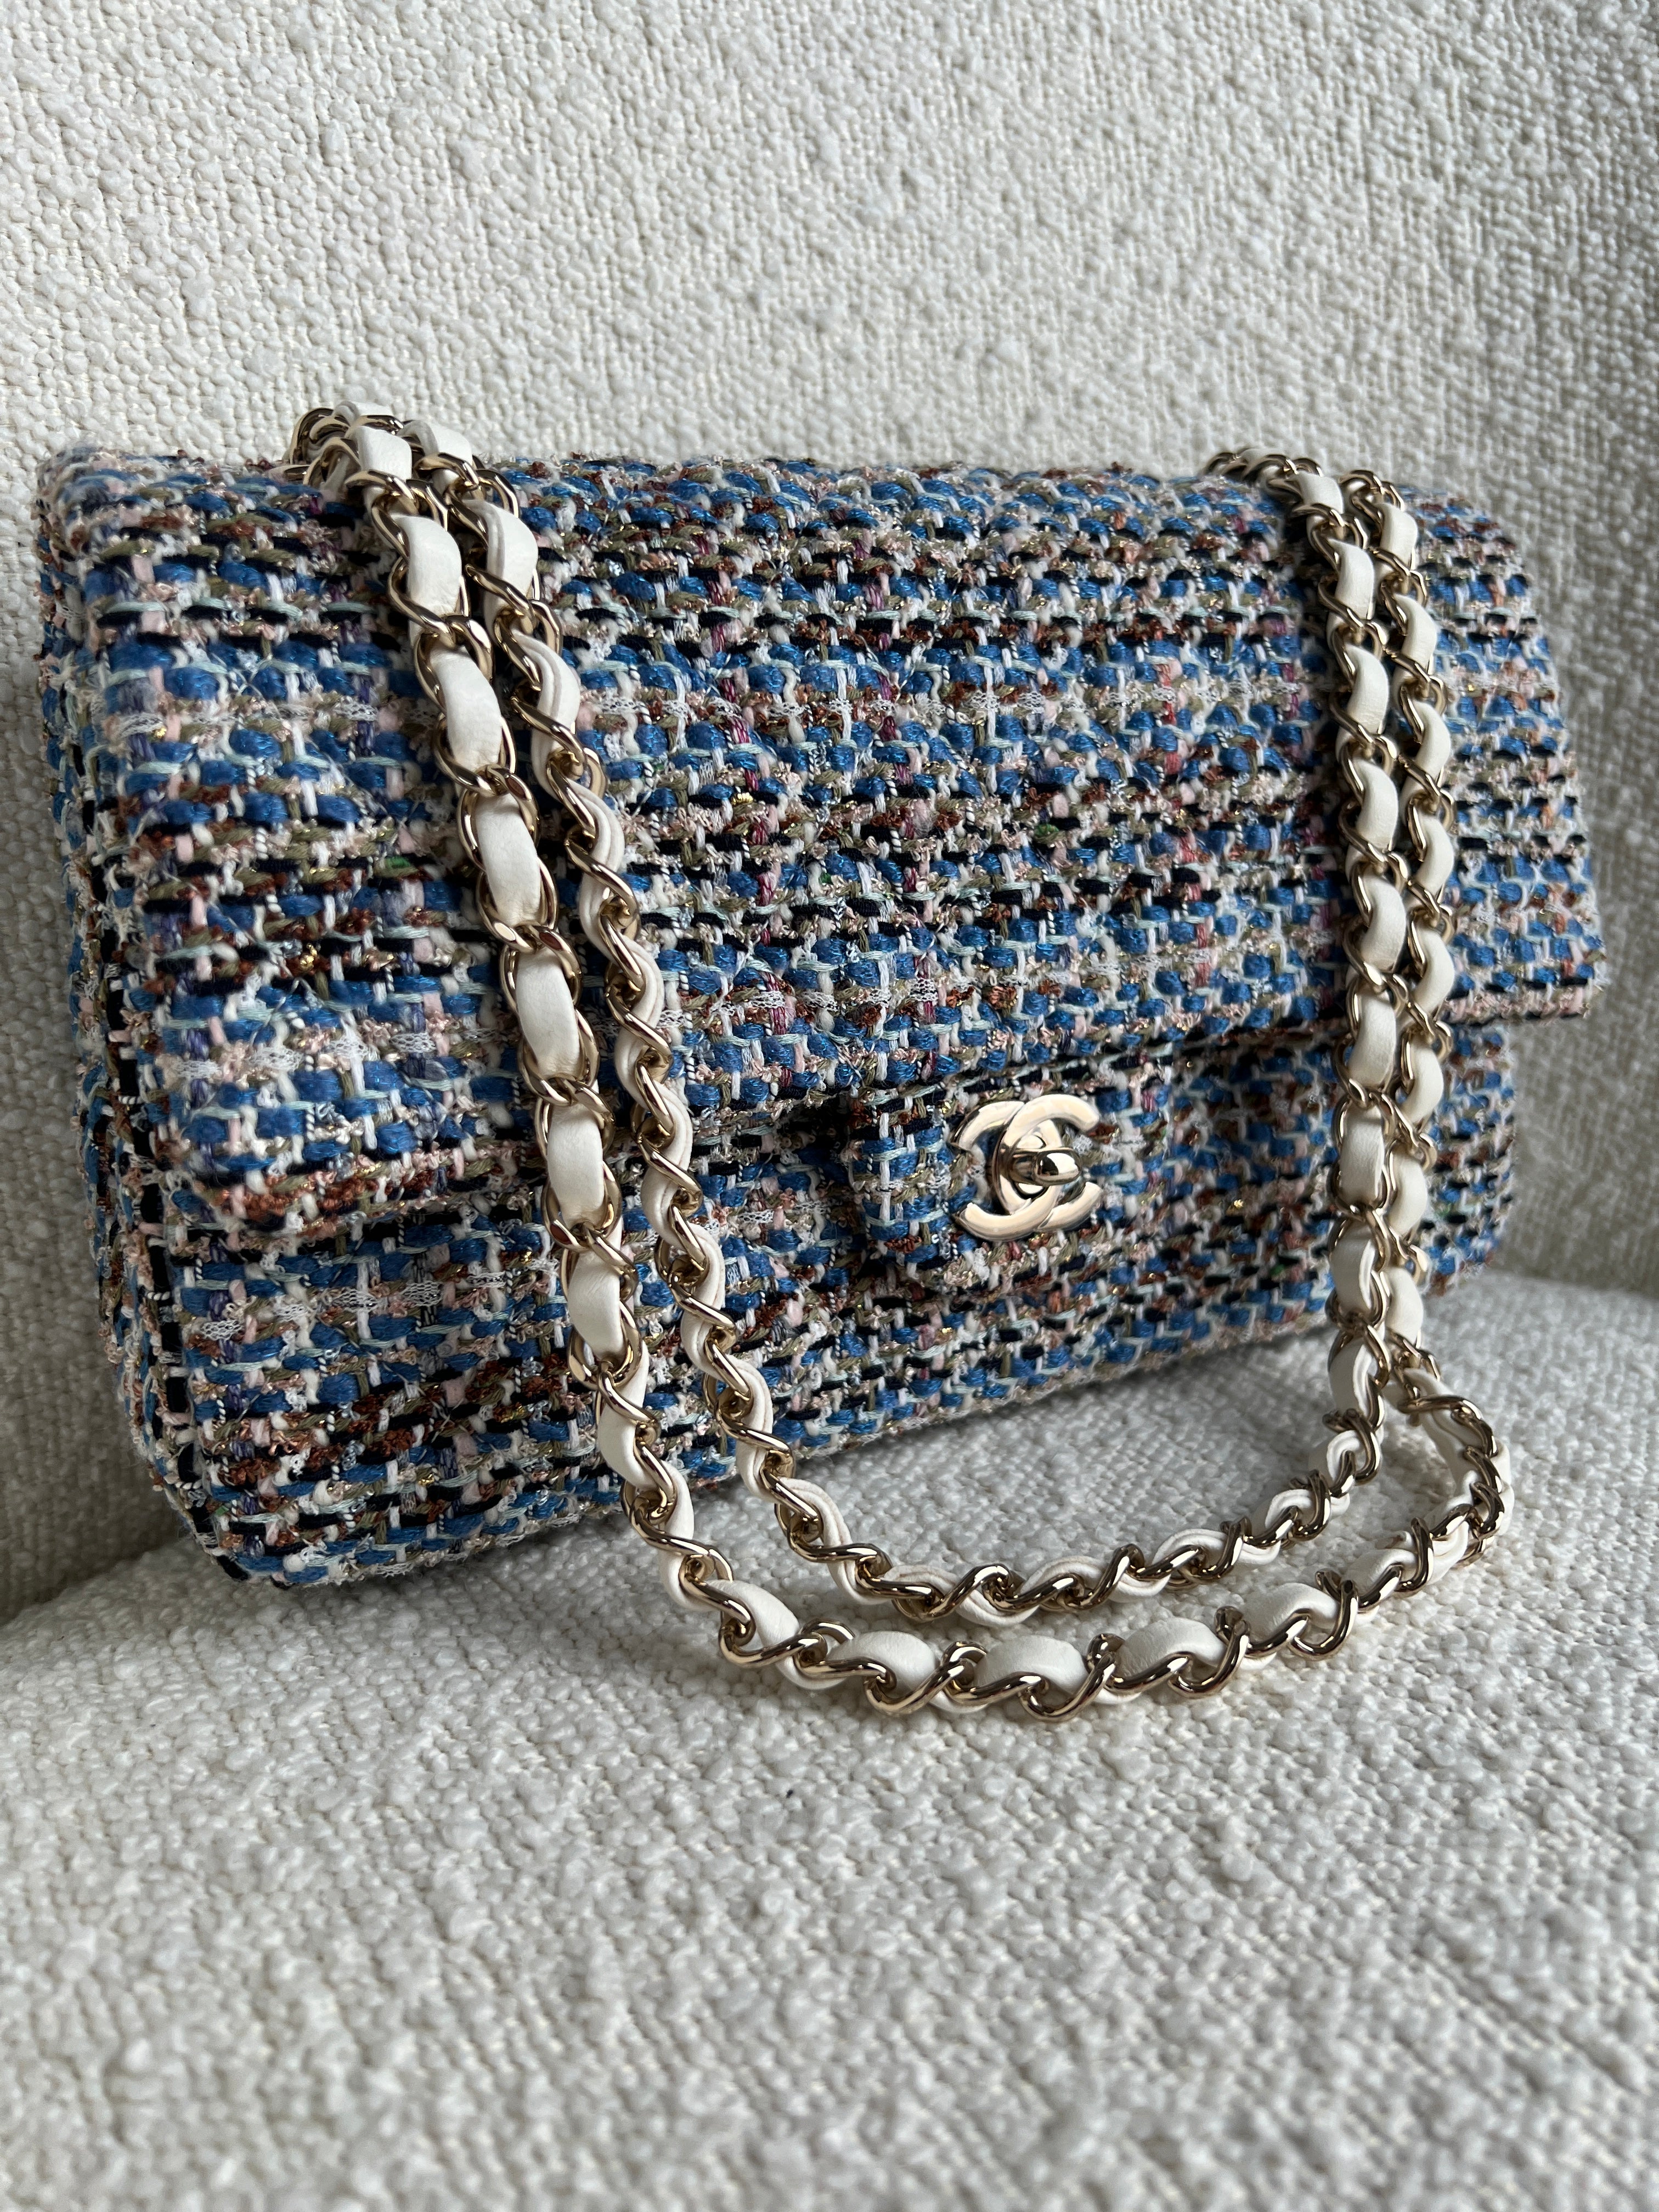 Chanel Vintage Pearl Chain Classic Double Flap Bag Quilted Tweed Medium